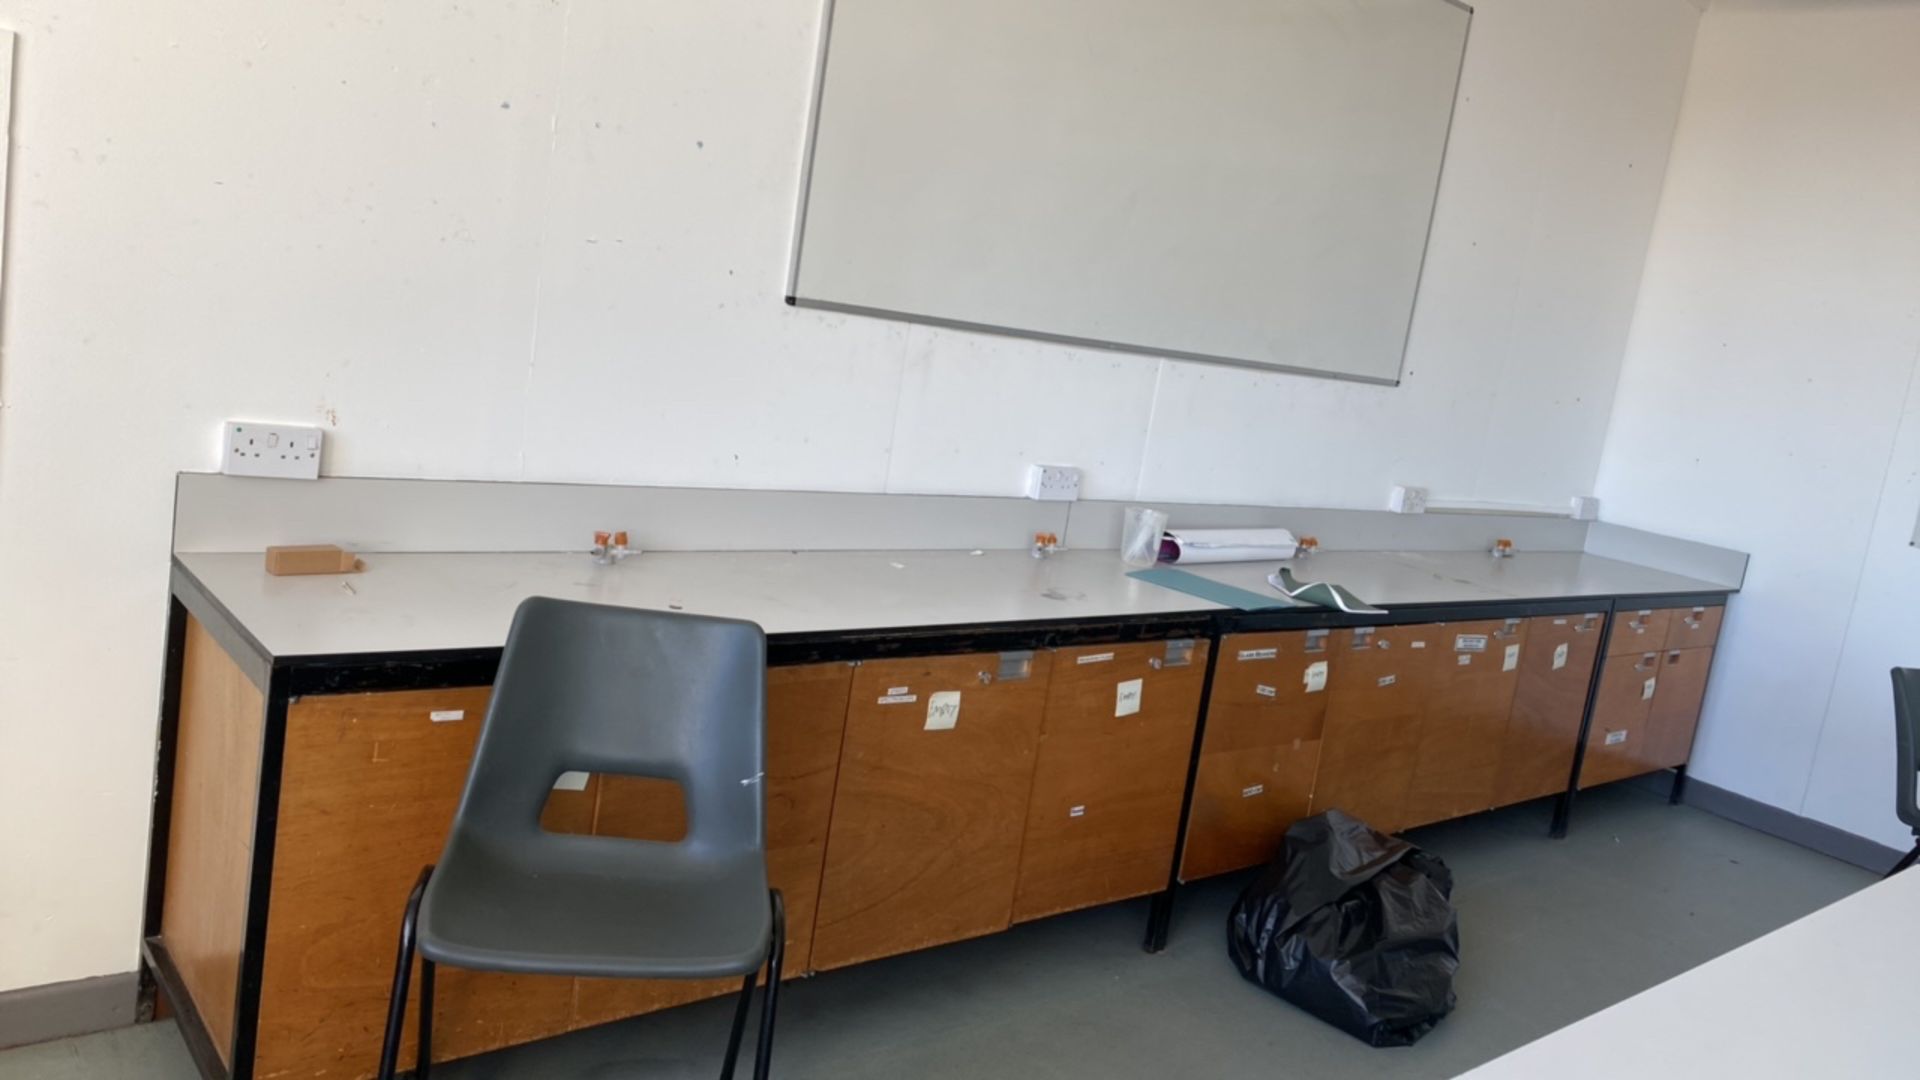 Entire Contents Of Science Room 205 - Image 7 of 10